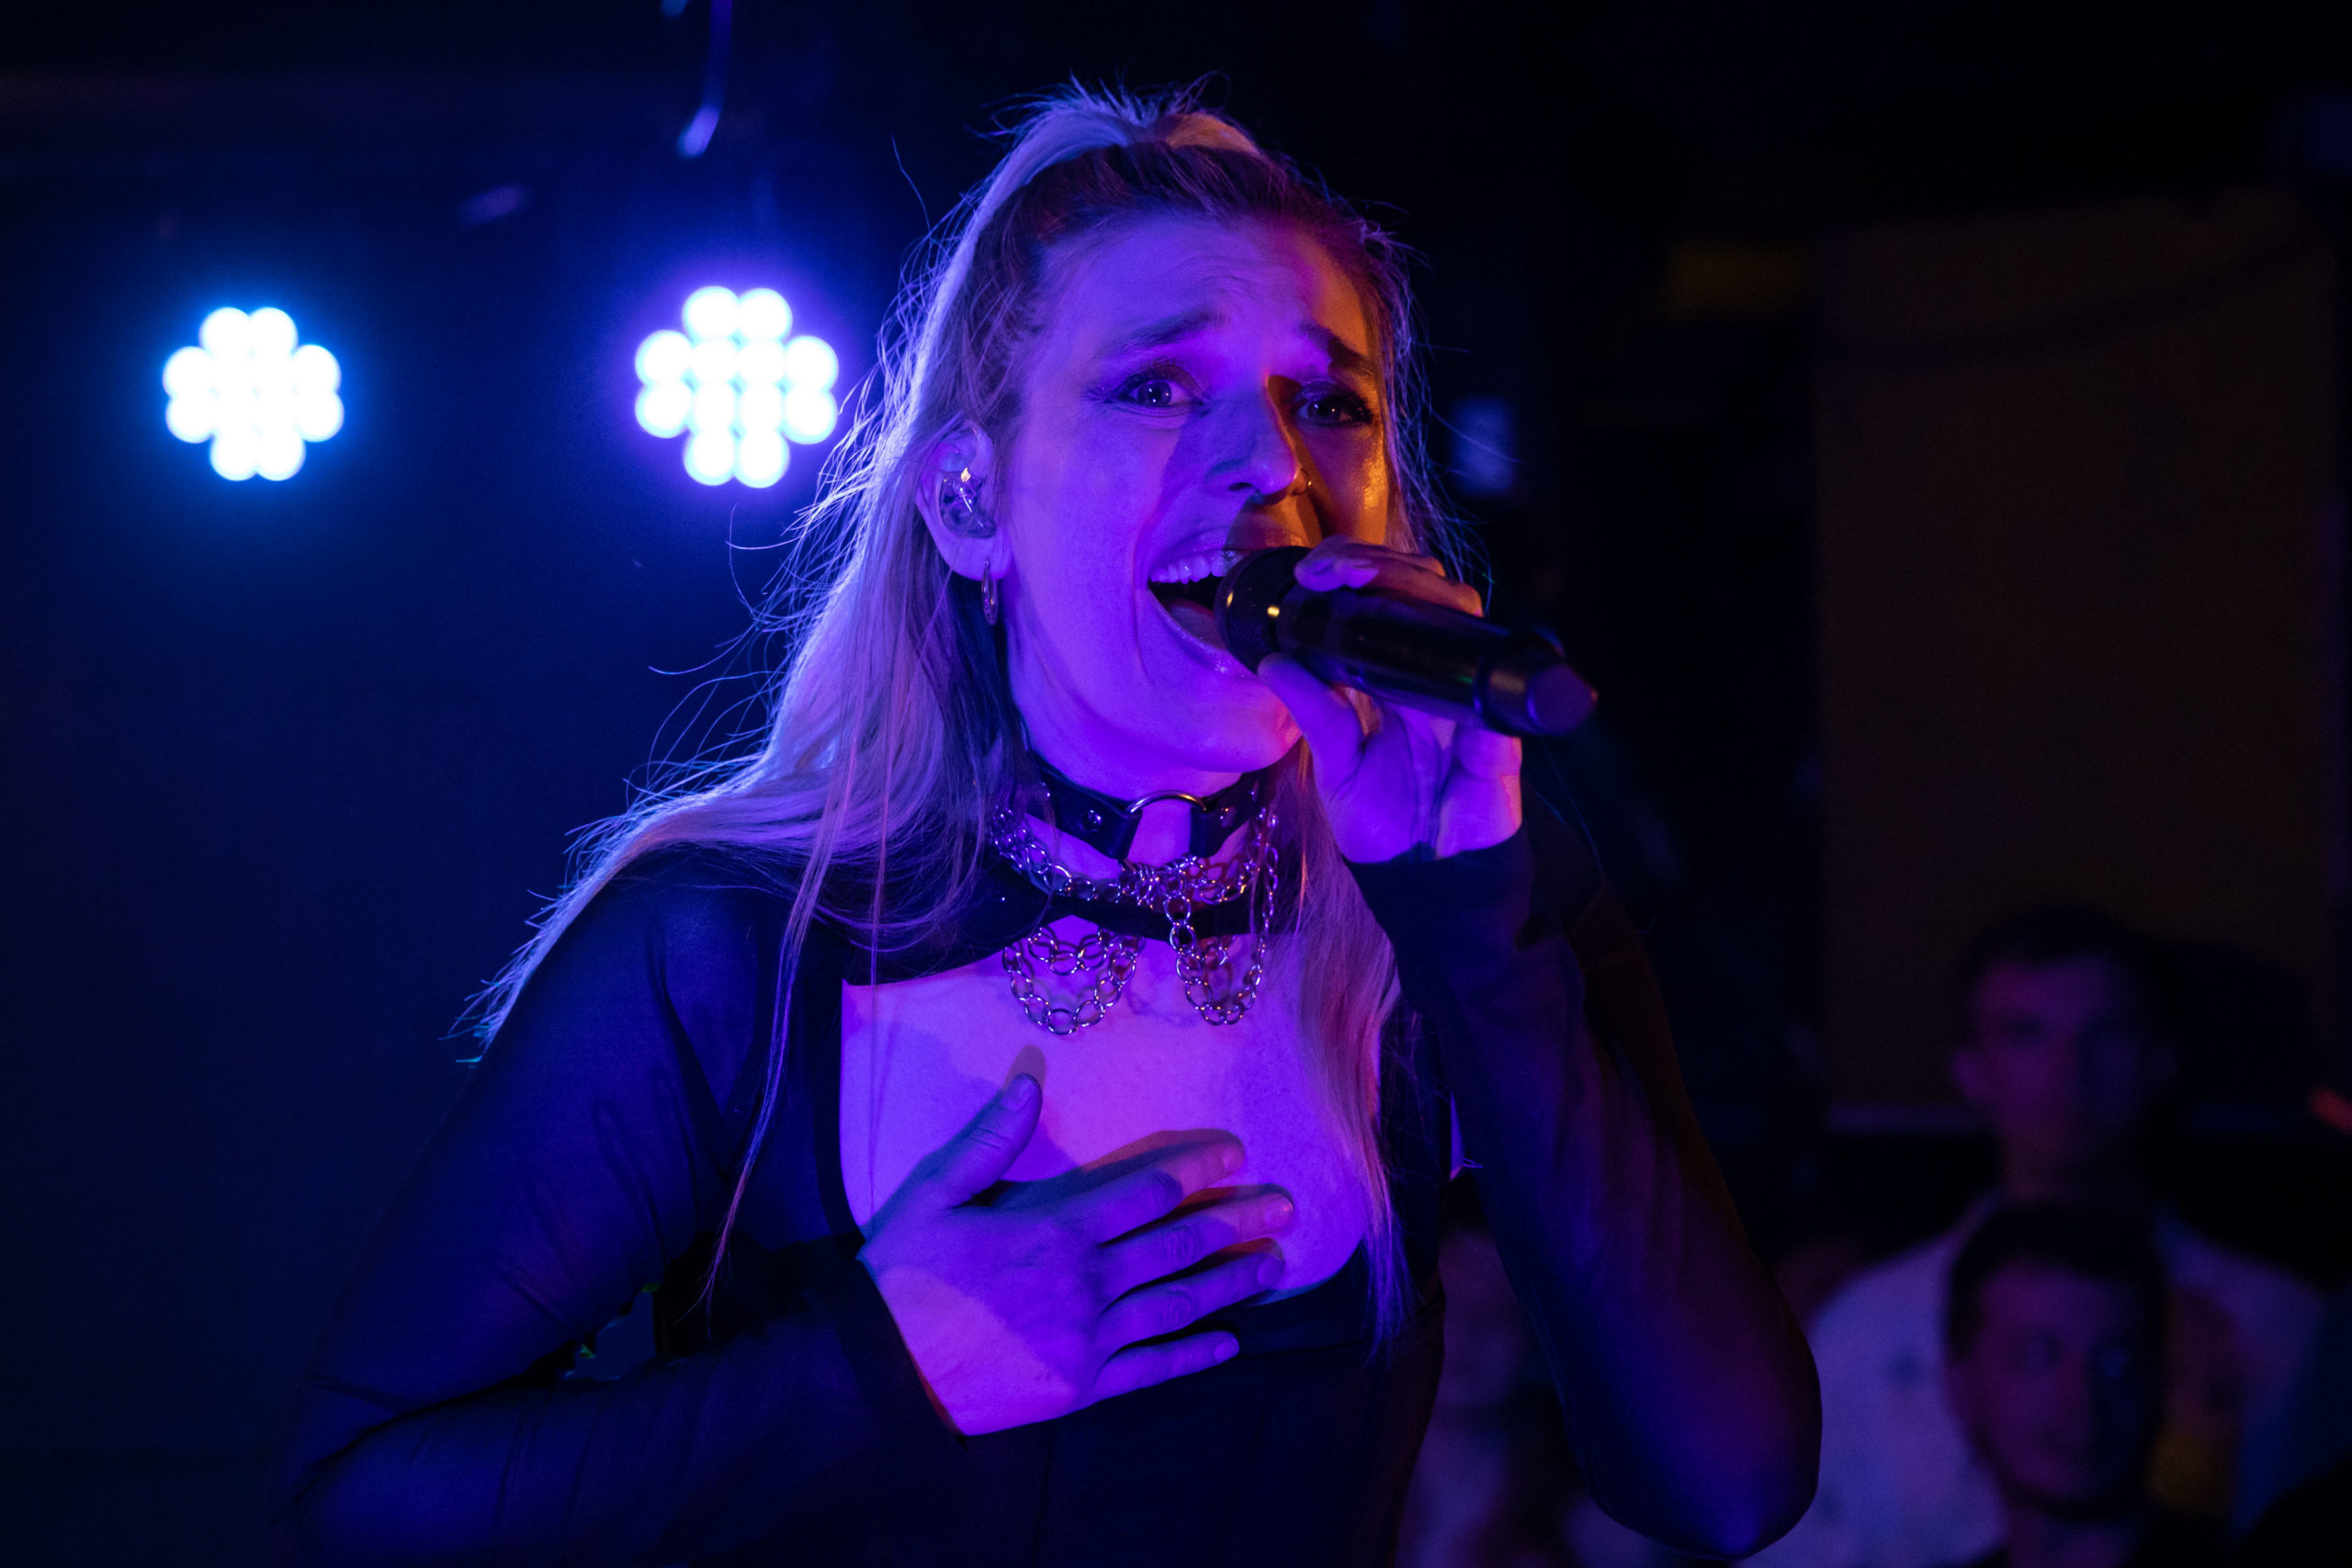 Vérité is bathed in purple light, singing full of emotion on the stage of the Biltmore Cabaret